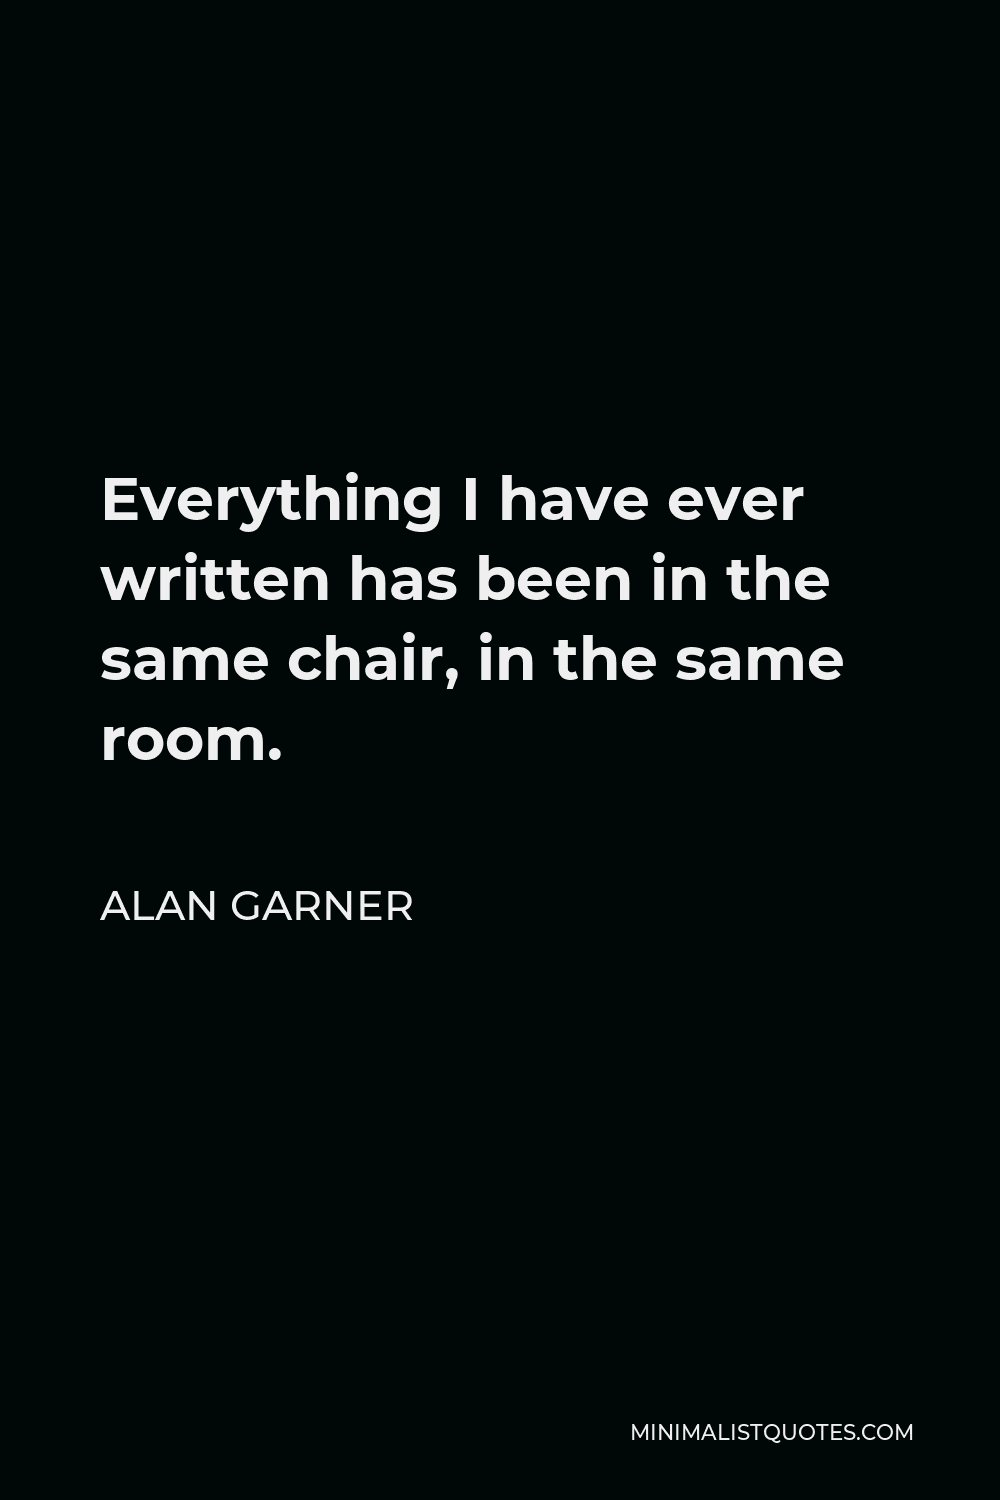 Alan Garner Quote - Everything I have ever written has been in the same chair, in the same room.